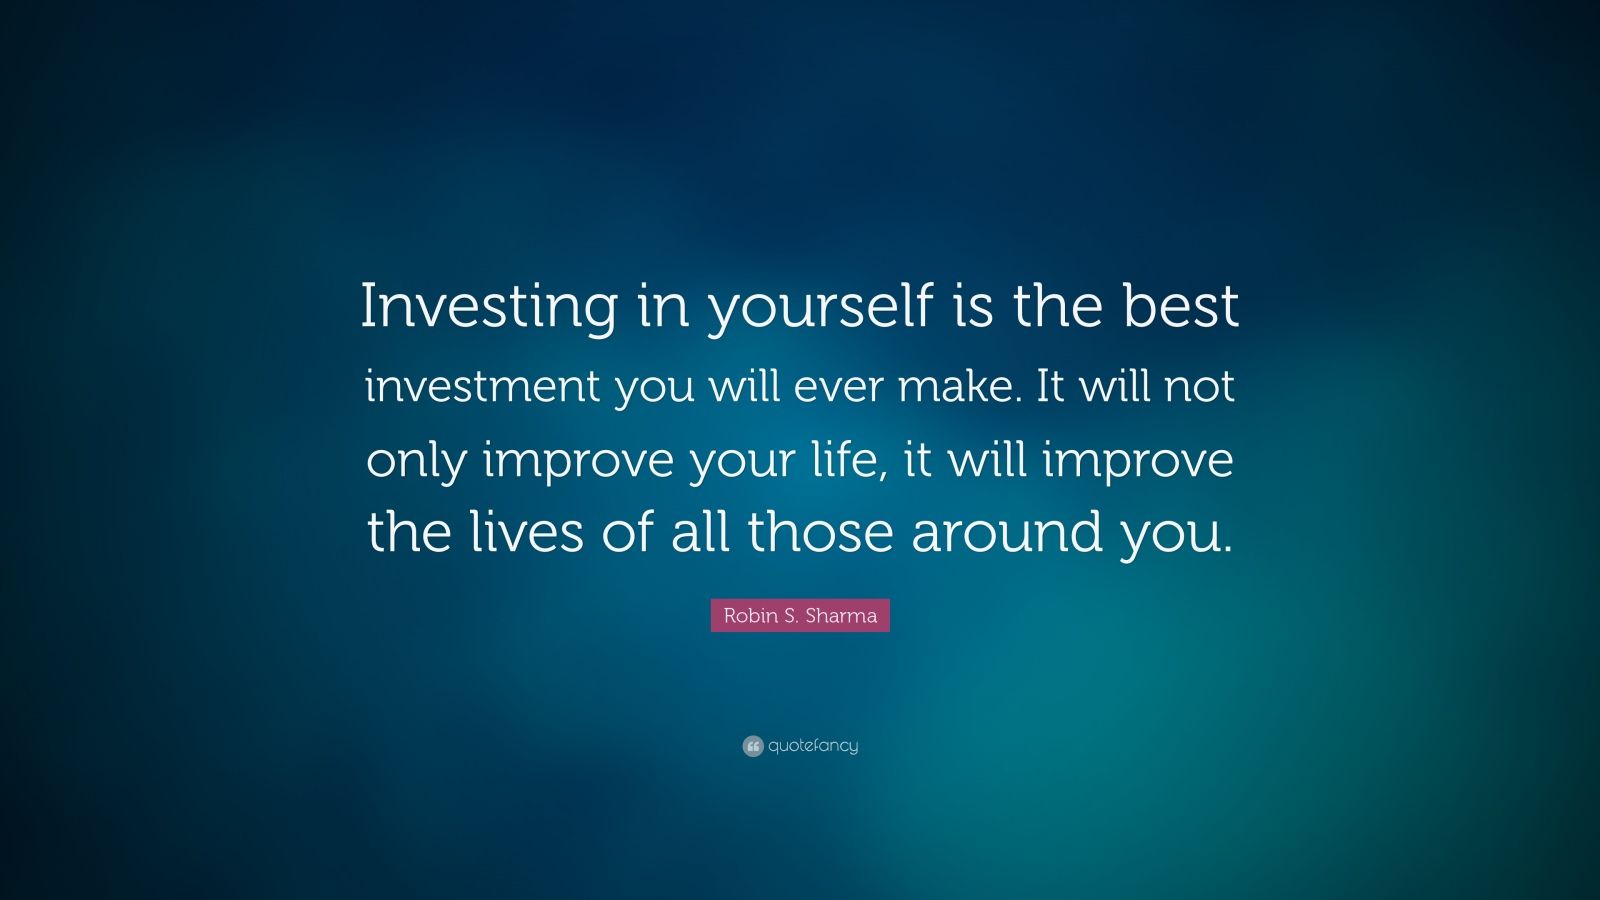 Robin S. Sharma Quote “Investing in yourself is the best